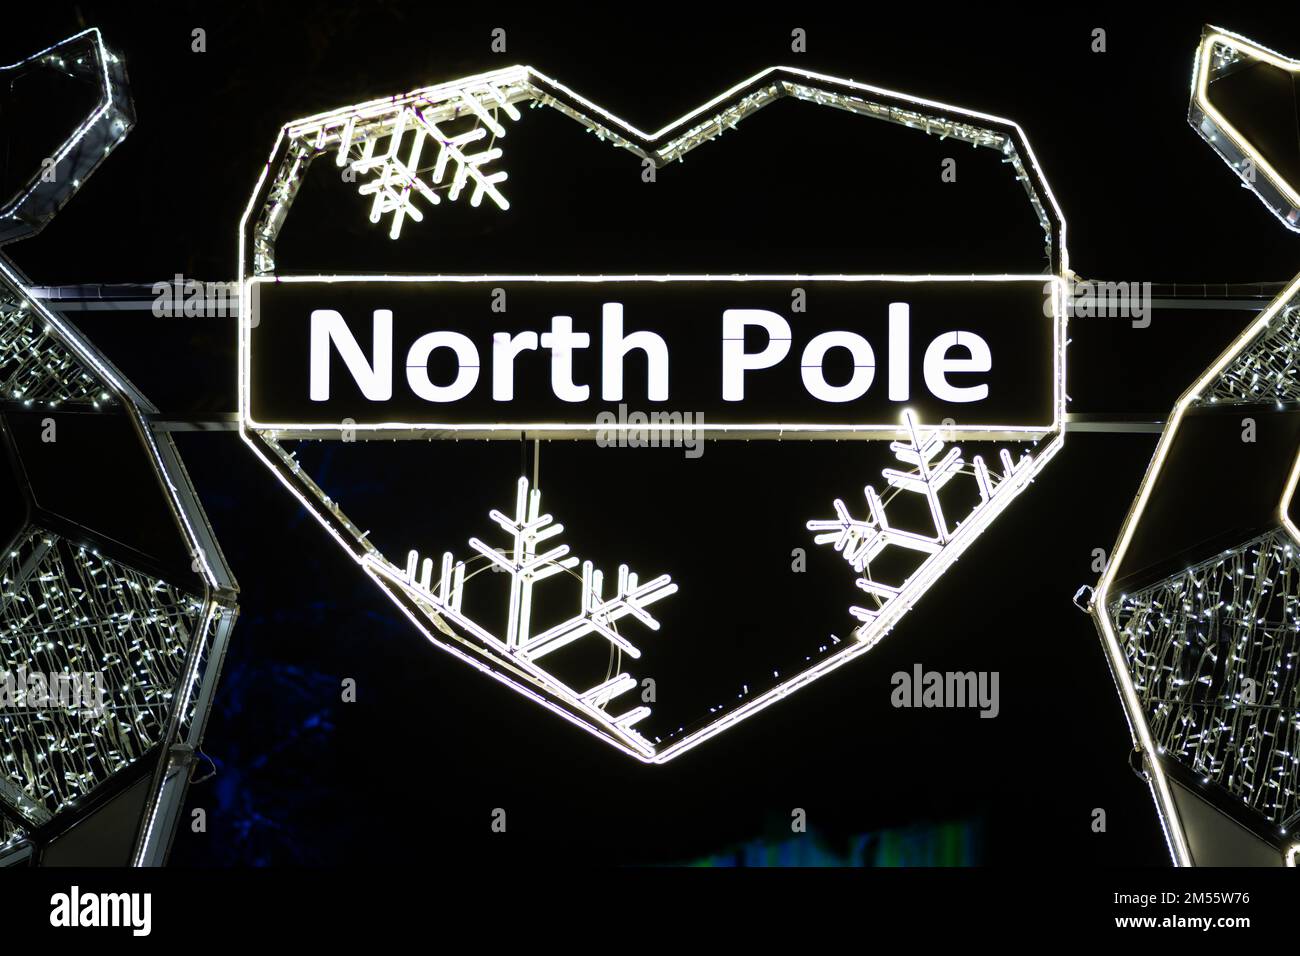 North Pole written in a heart with snowflakes made with the glowing lights, with northern lights and black background Stock Photo